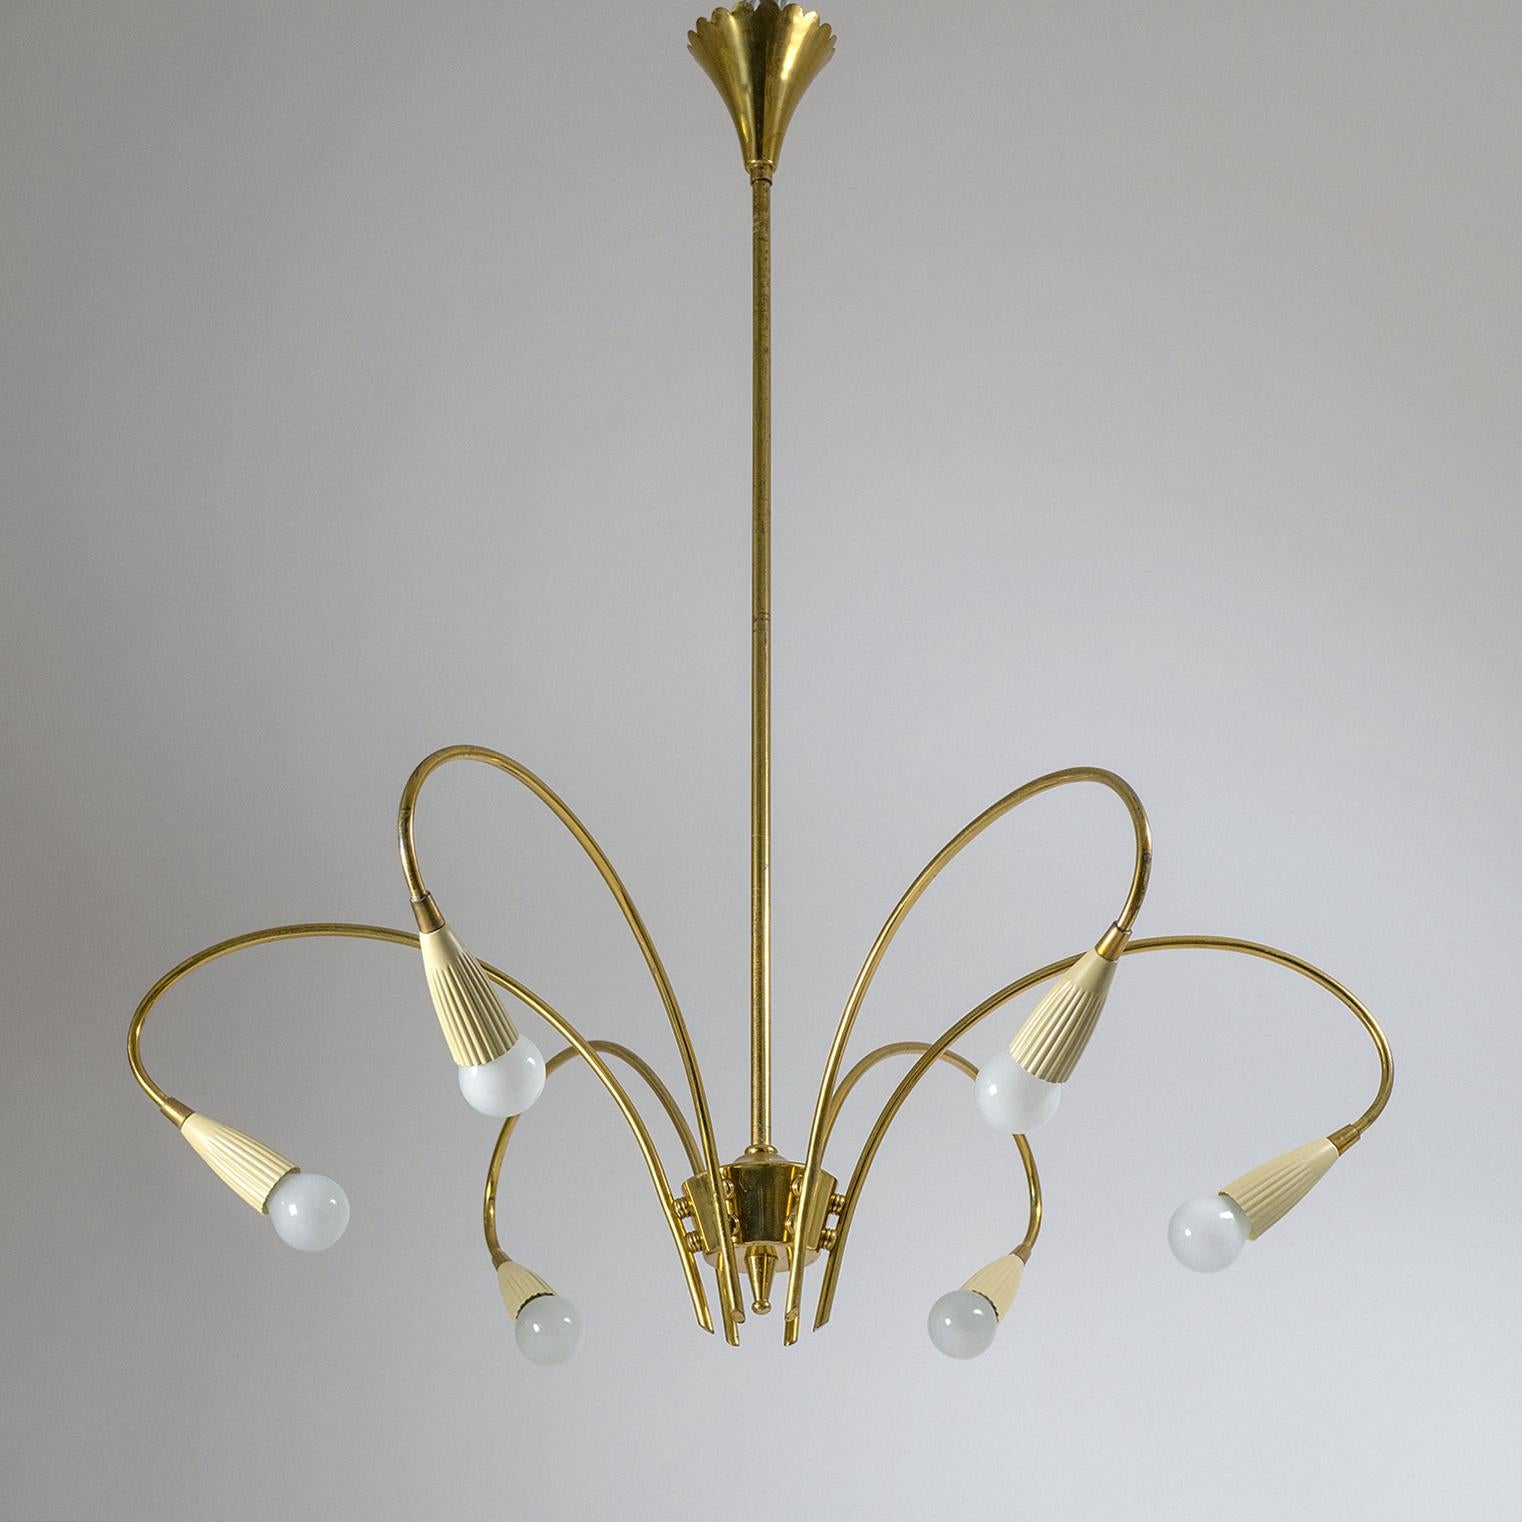 Very fine Italian brass chandelier from the early 1950s or possibly late 1940s. Nice example of how traditional designs were reworked with a modernist approach during these early post-war years. The chandelier is entirely in brass with the exception